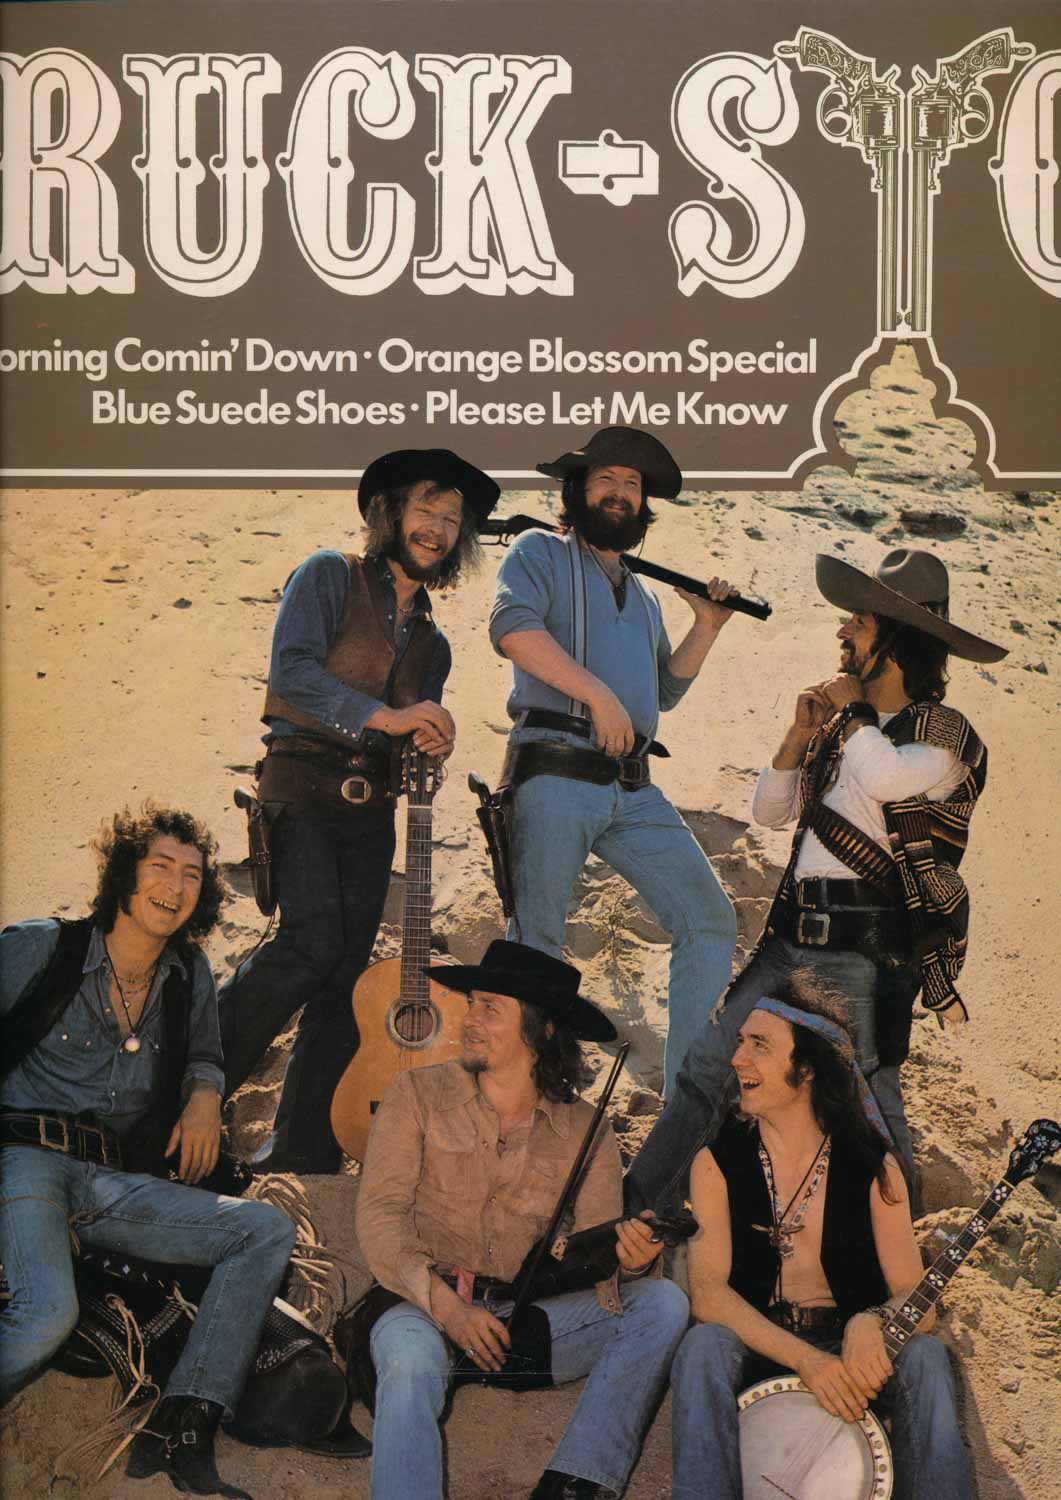 Truck Stop  Truck Stop Sunday Morning Comin´Down / Orange Blossom Special / Blue Suede Shoes ua. (SLE 14 742-P)  *LP 12'' (Vinyl)*. 